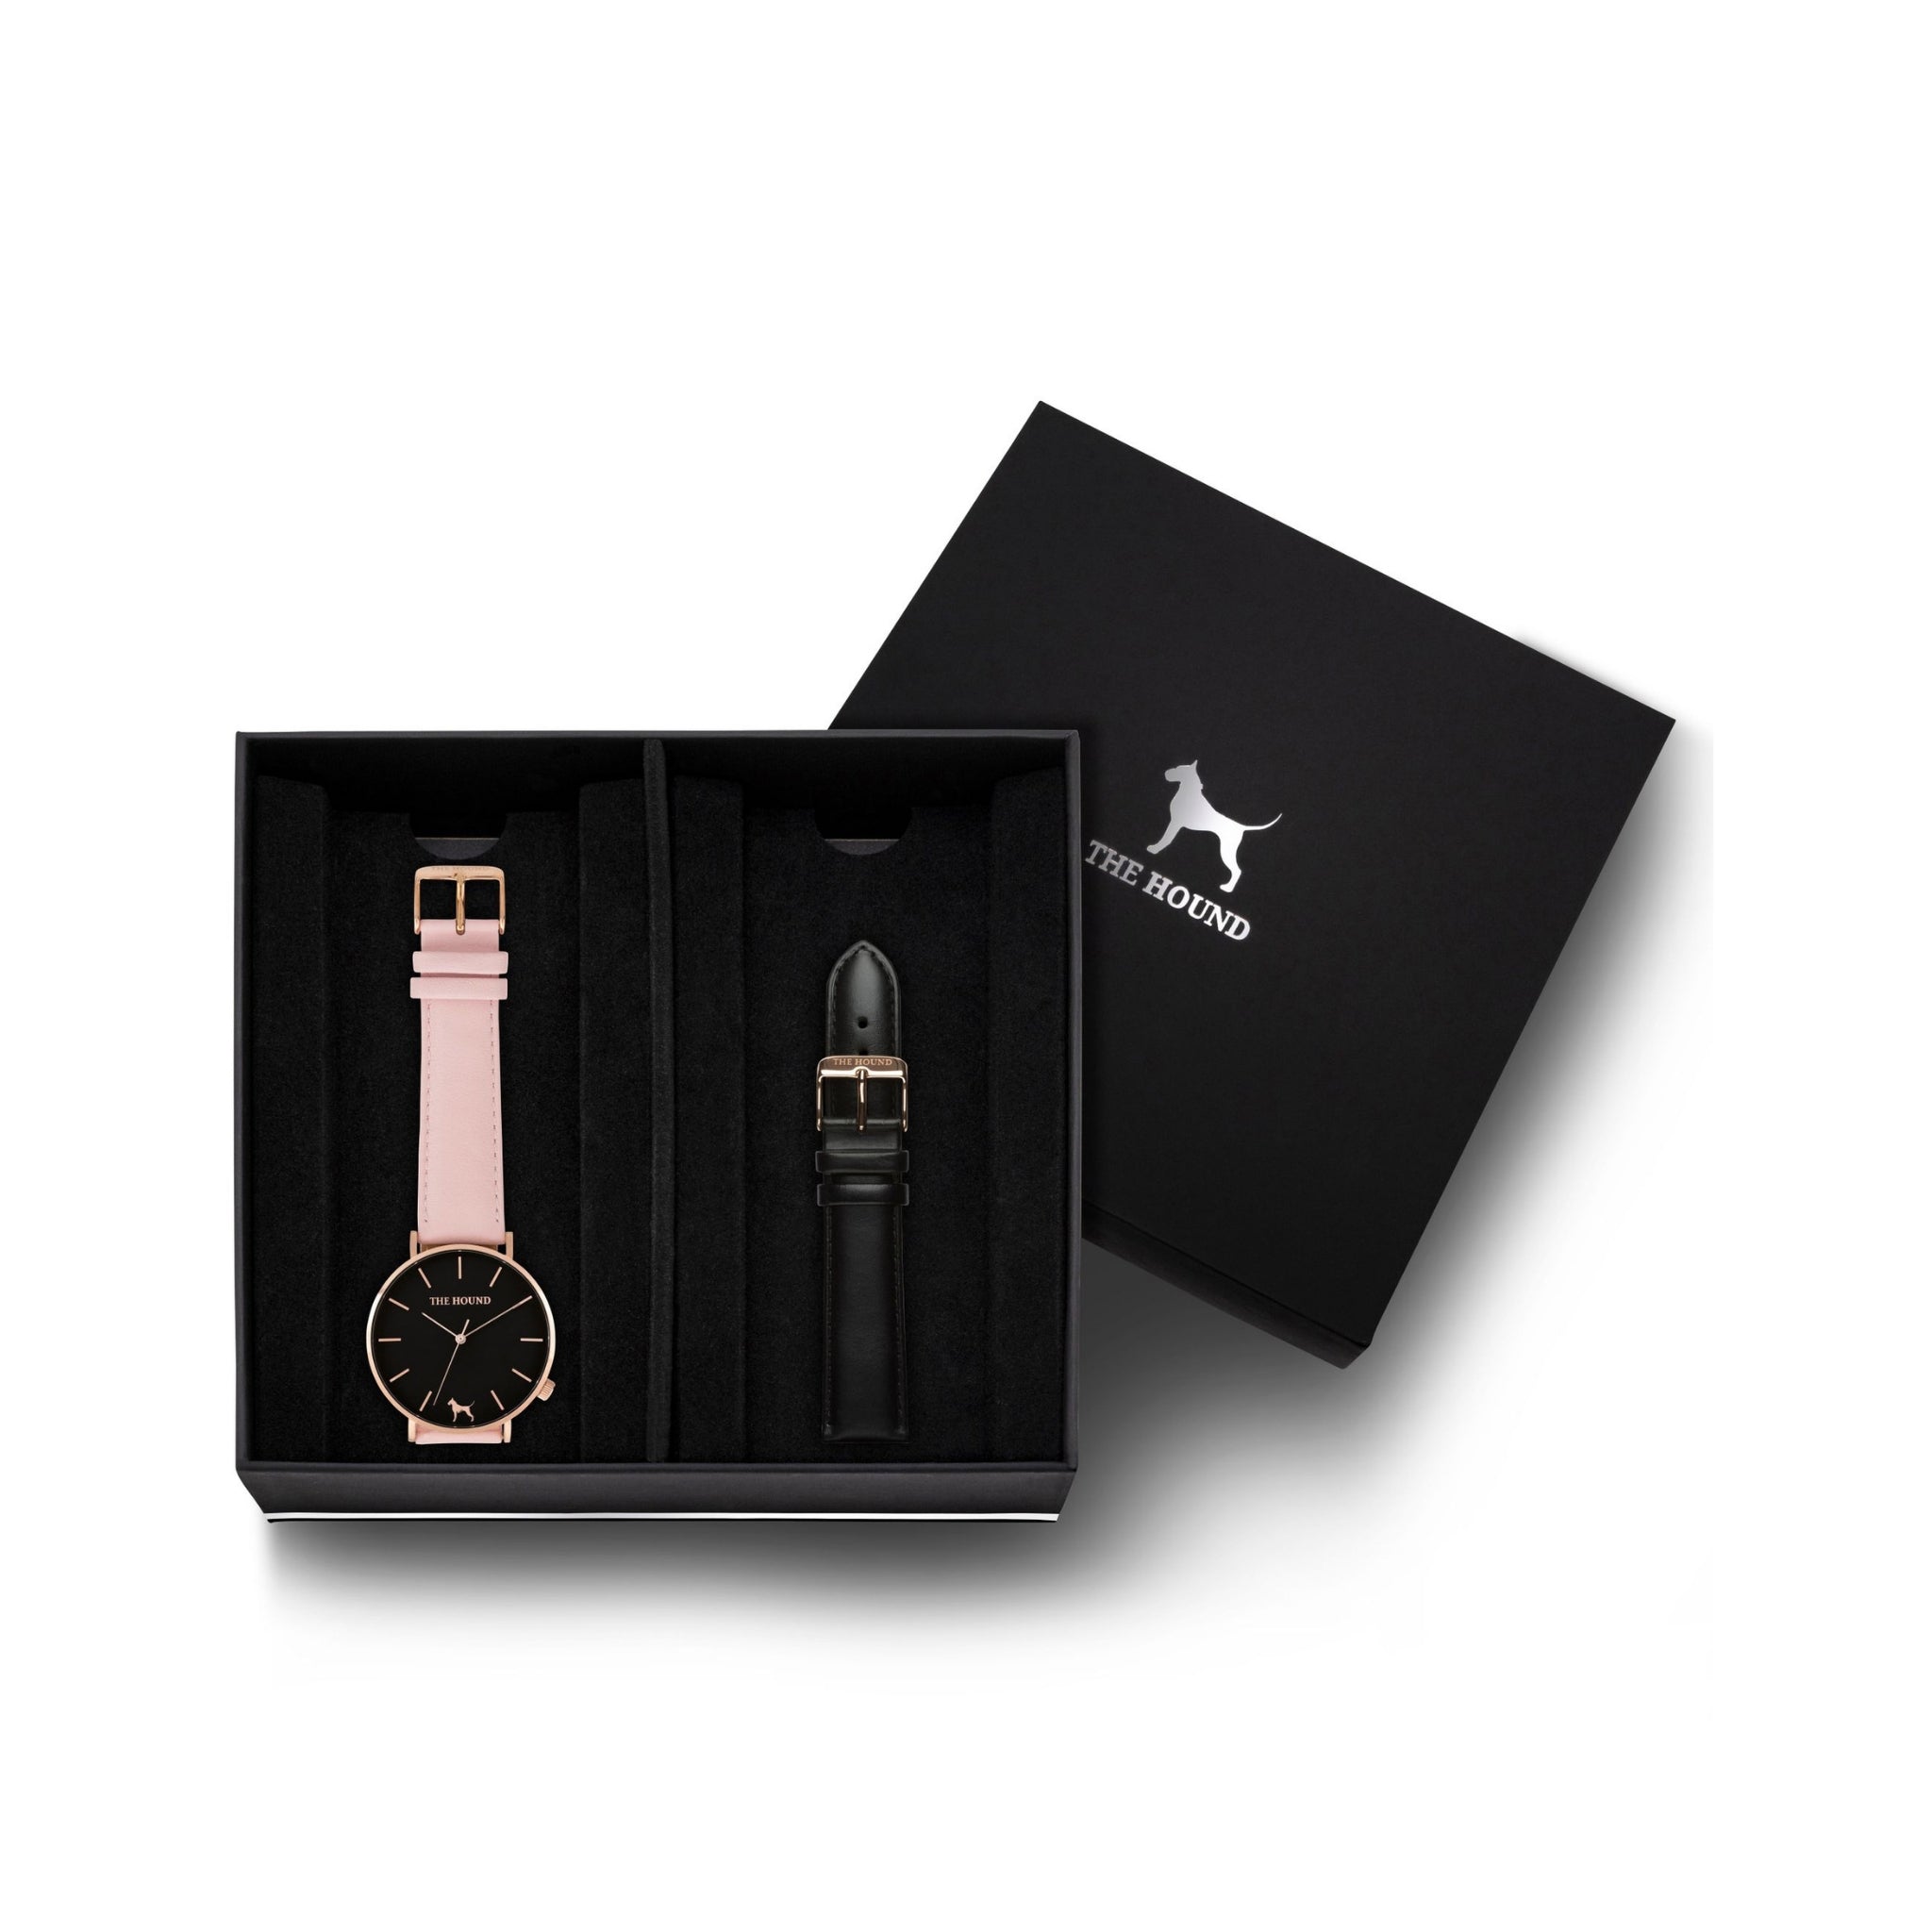 Black Rose Watch<br>+ Blush Pink Leather Band<br>+ Black Leather Band